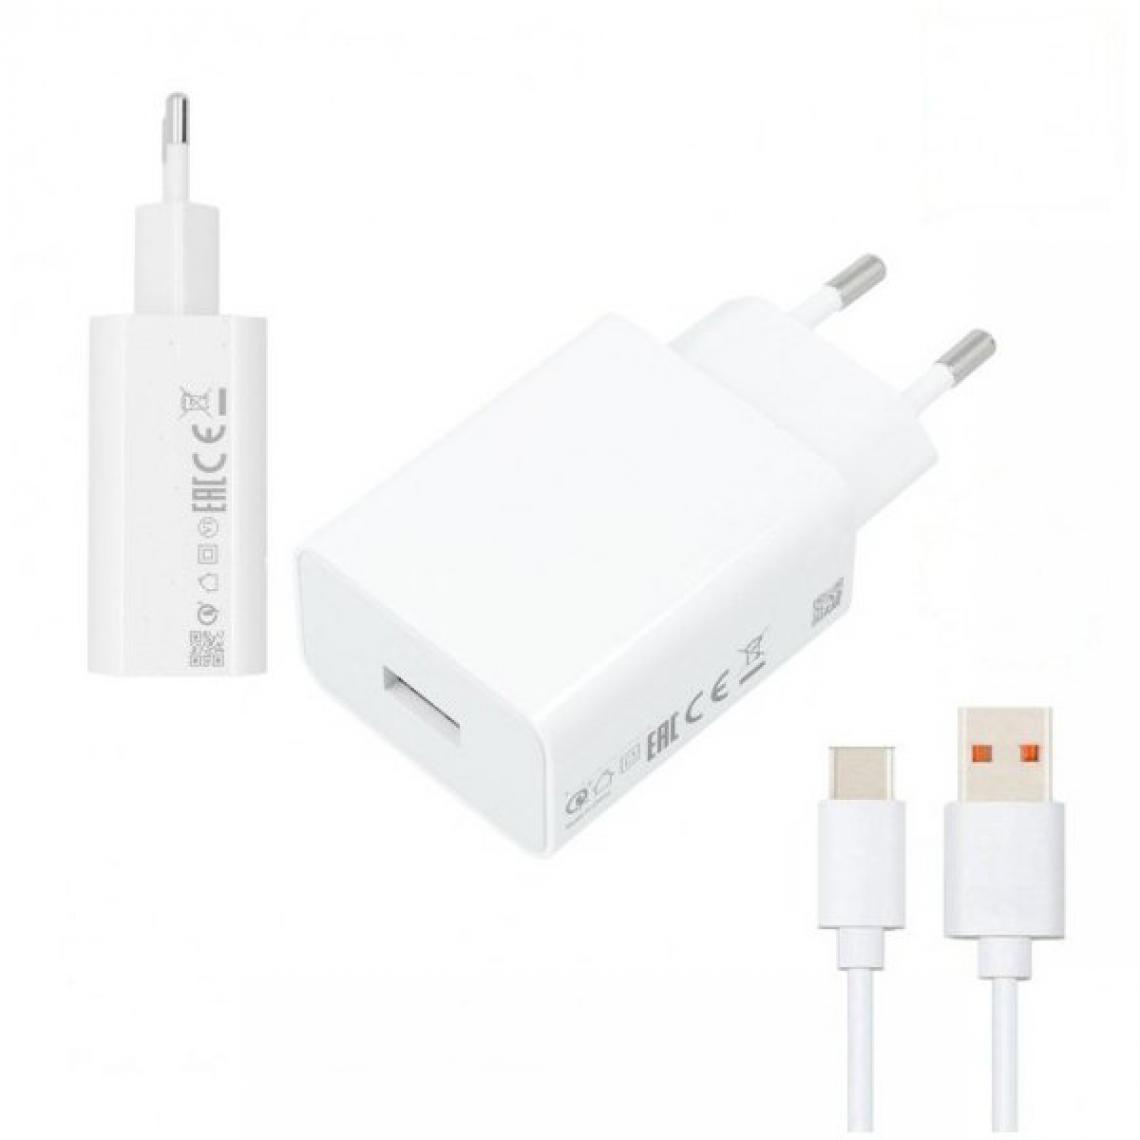 Phonecare - Kit Chargeur Turbo Fast Charge 33W 3A USB + Câble de Charge Turbo Fast Charge 5A Type-C 1M - Xiaomi Redmi K40 Pro - Autres accessoires smartphone